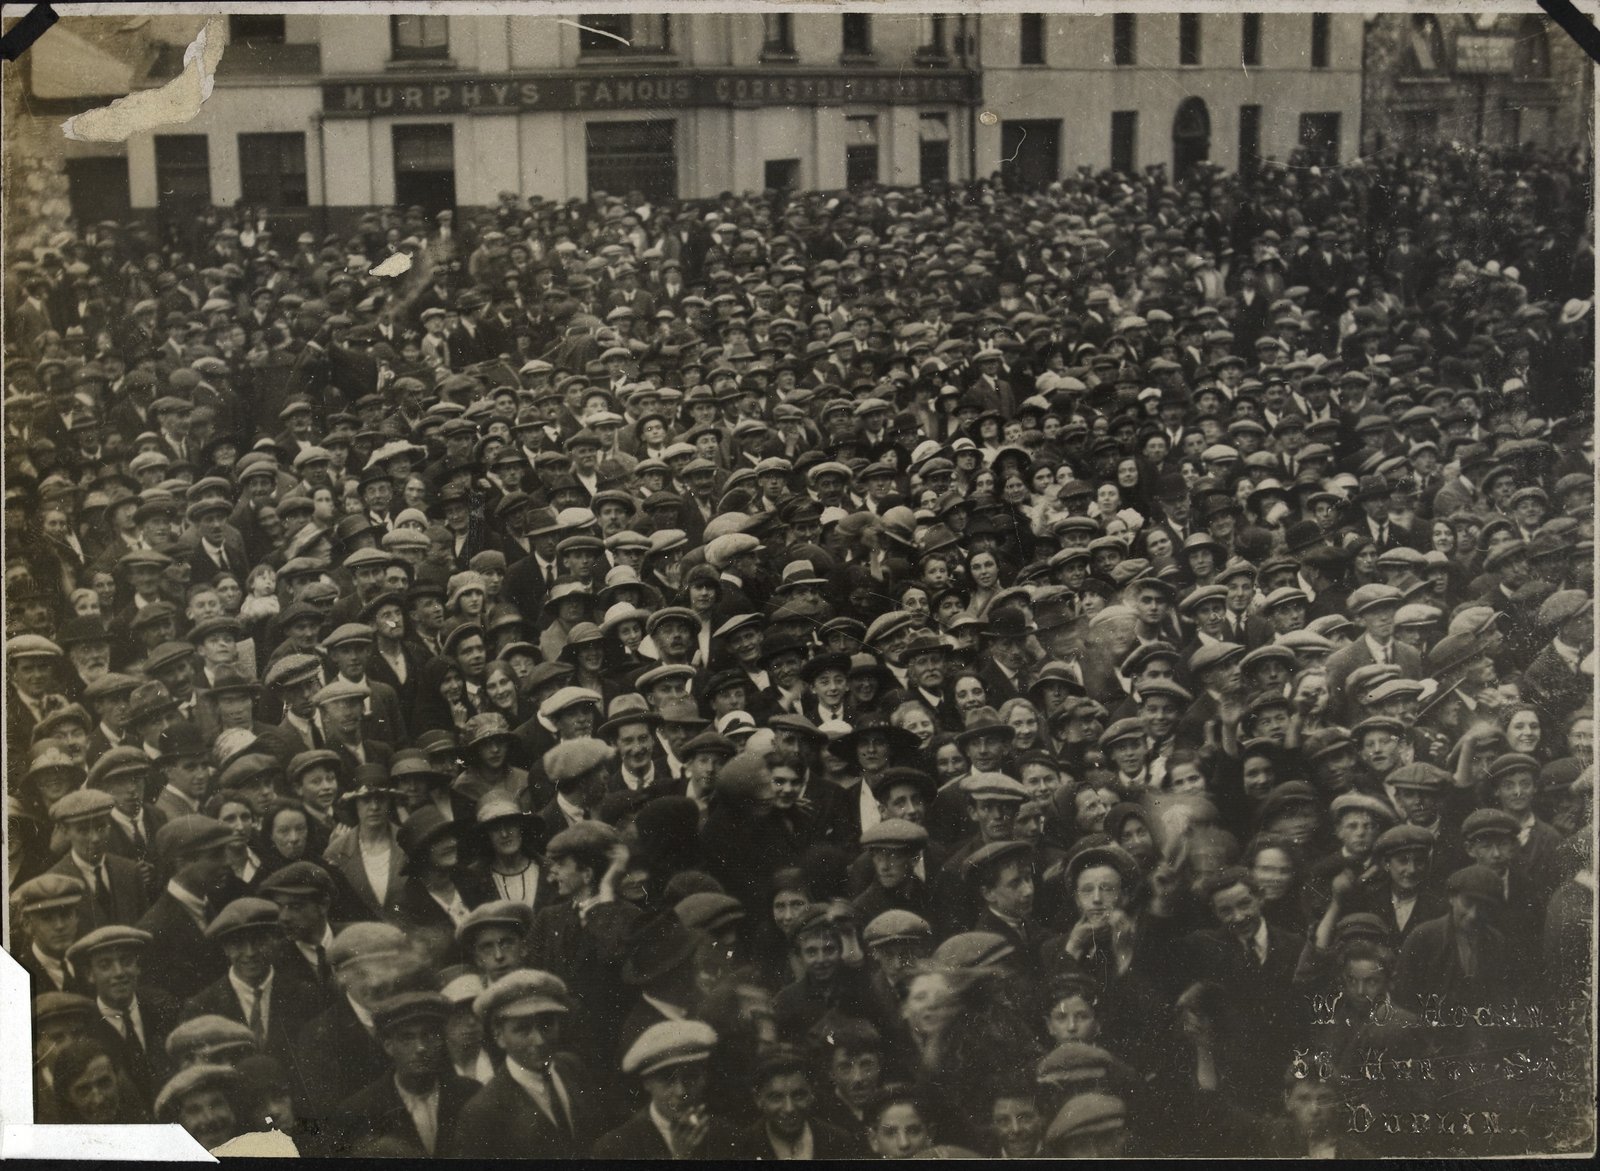 Image - Crowds in Cork city welcome National Army troops after their arrival. National Library of Ireland